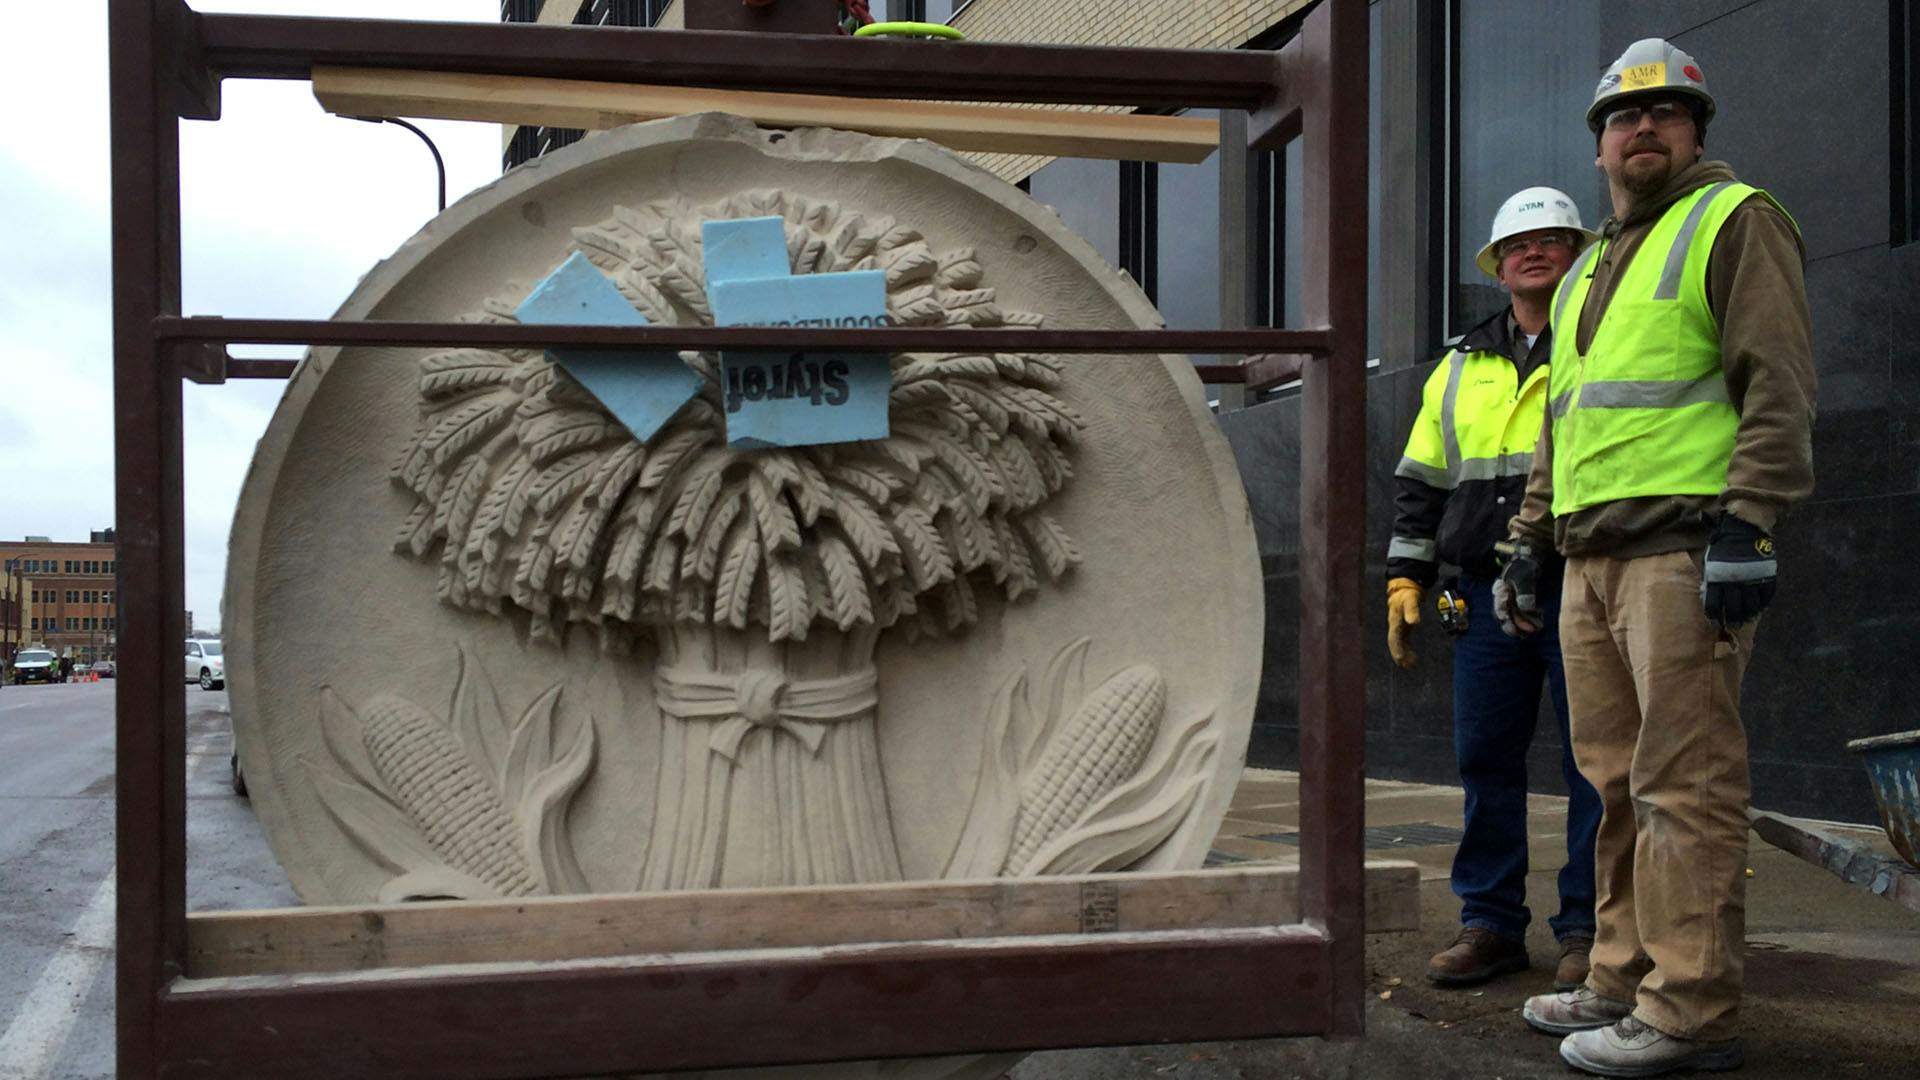 Crews from Ryan Companies worked to remove six historic medallions from the Star Tribune building.